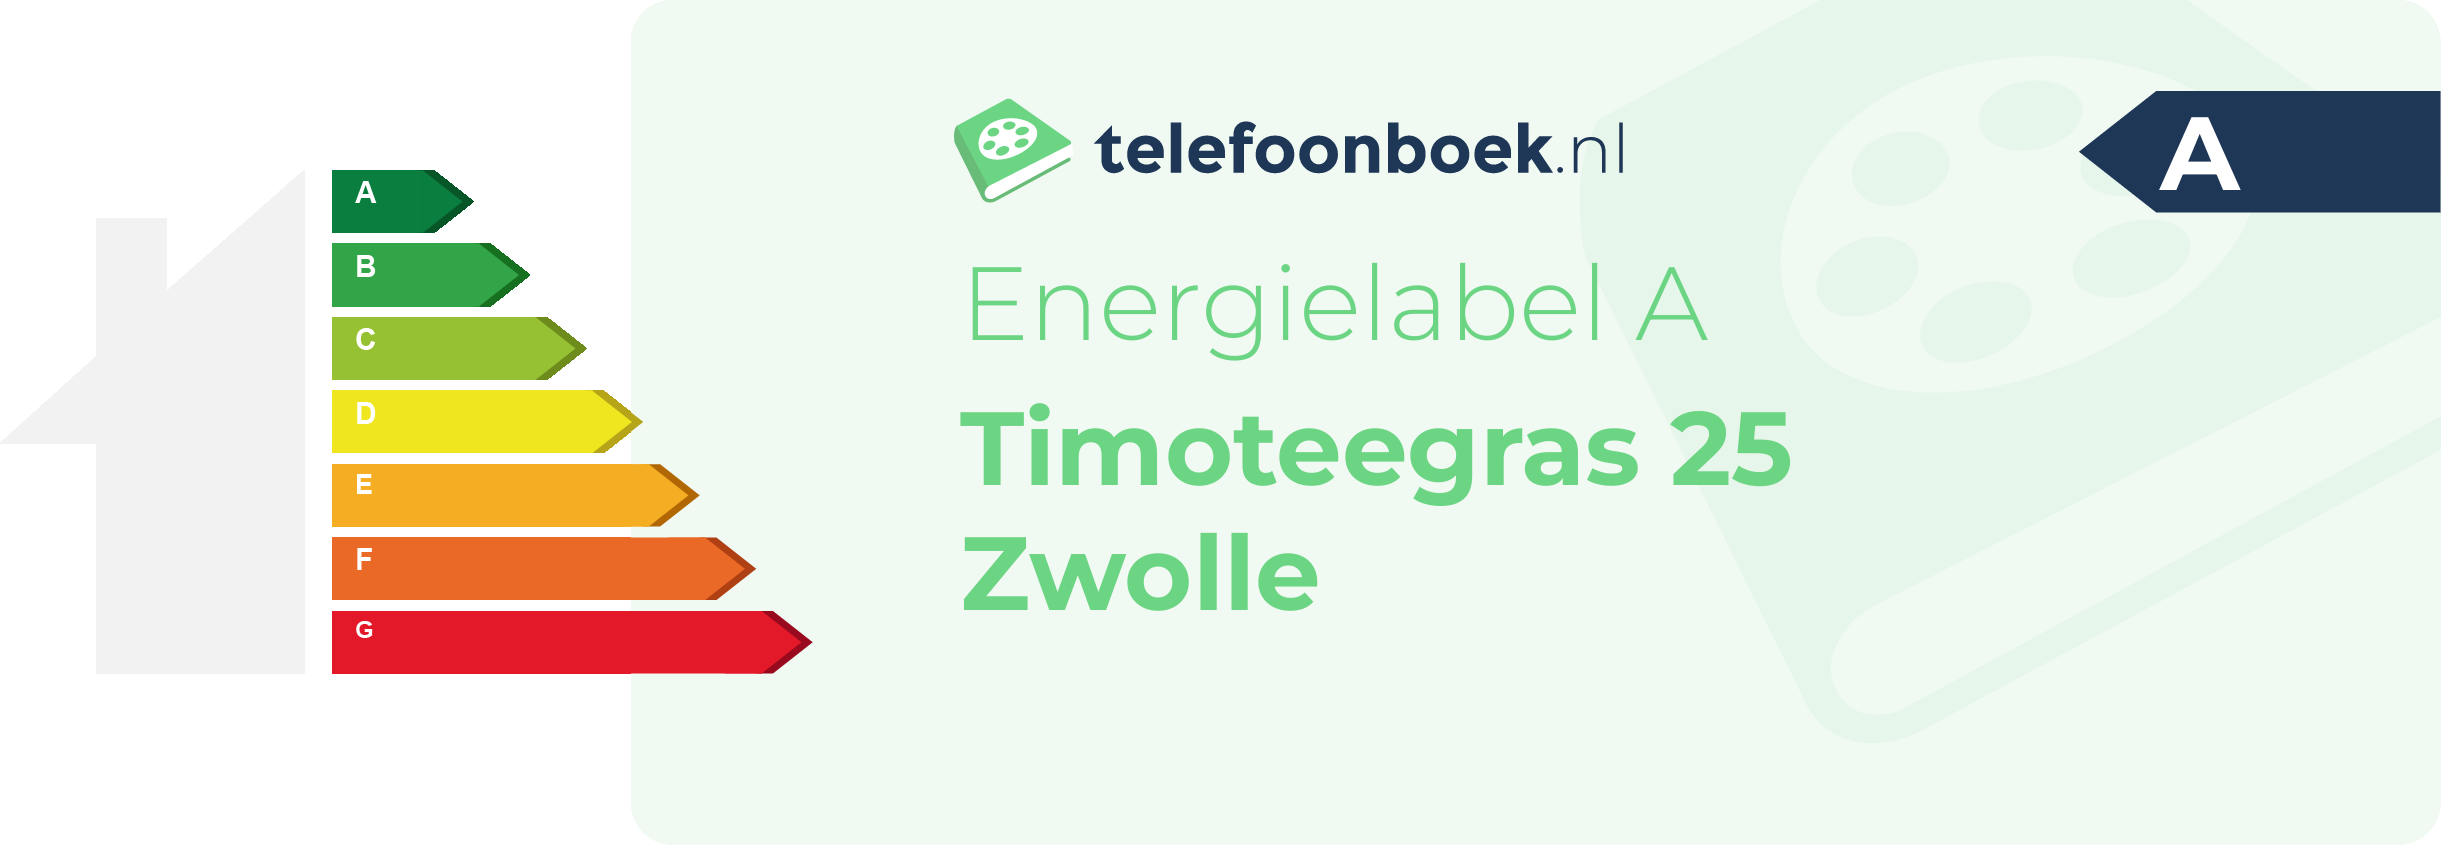 Energielabel Timoteegras 25 Zwolle